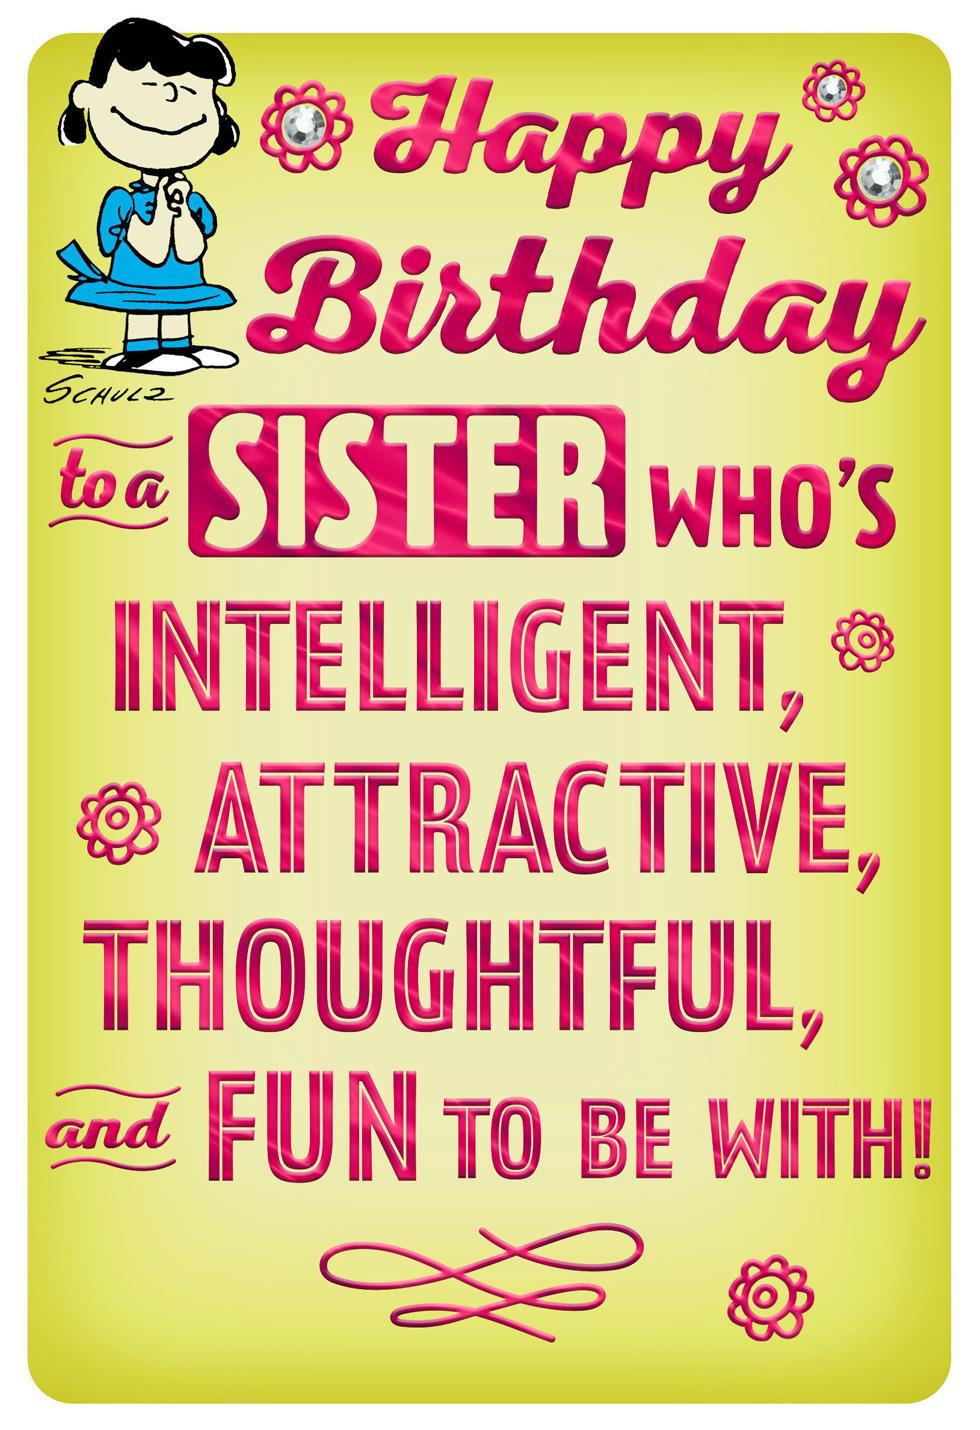 Funny Birthday Cards For Sisters
 Peanuts Lucy Fun and Intelligent Sister Funny Birthday